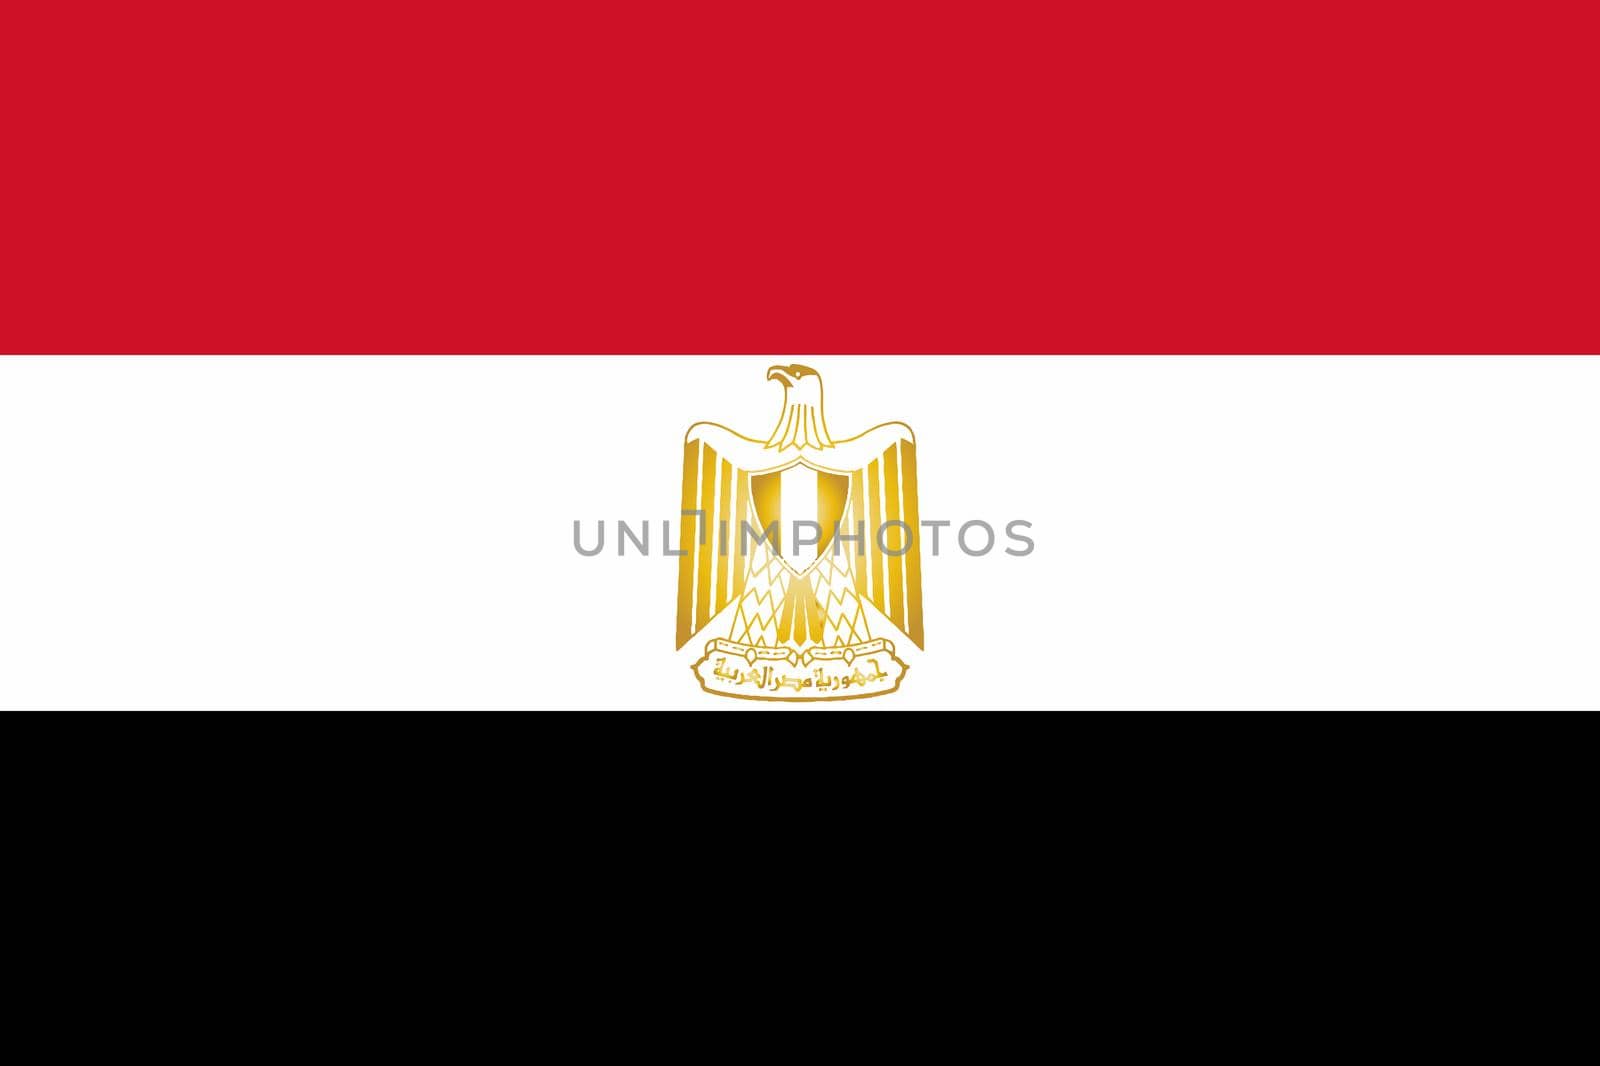 The flag of the African country of Egypt